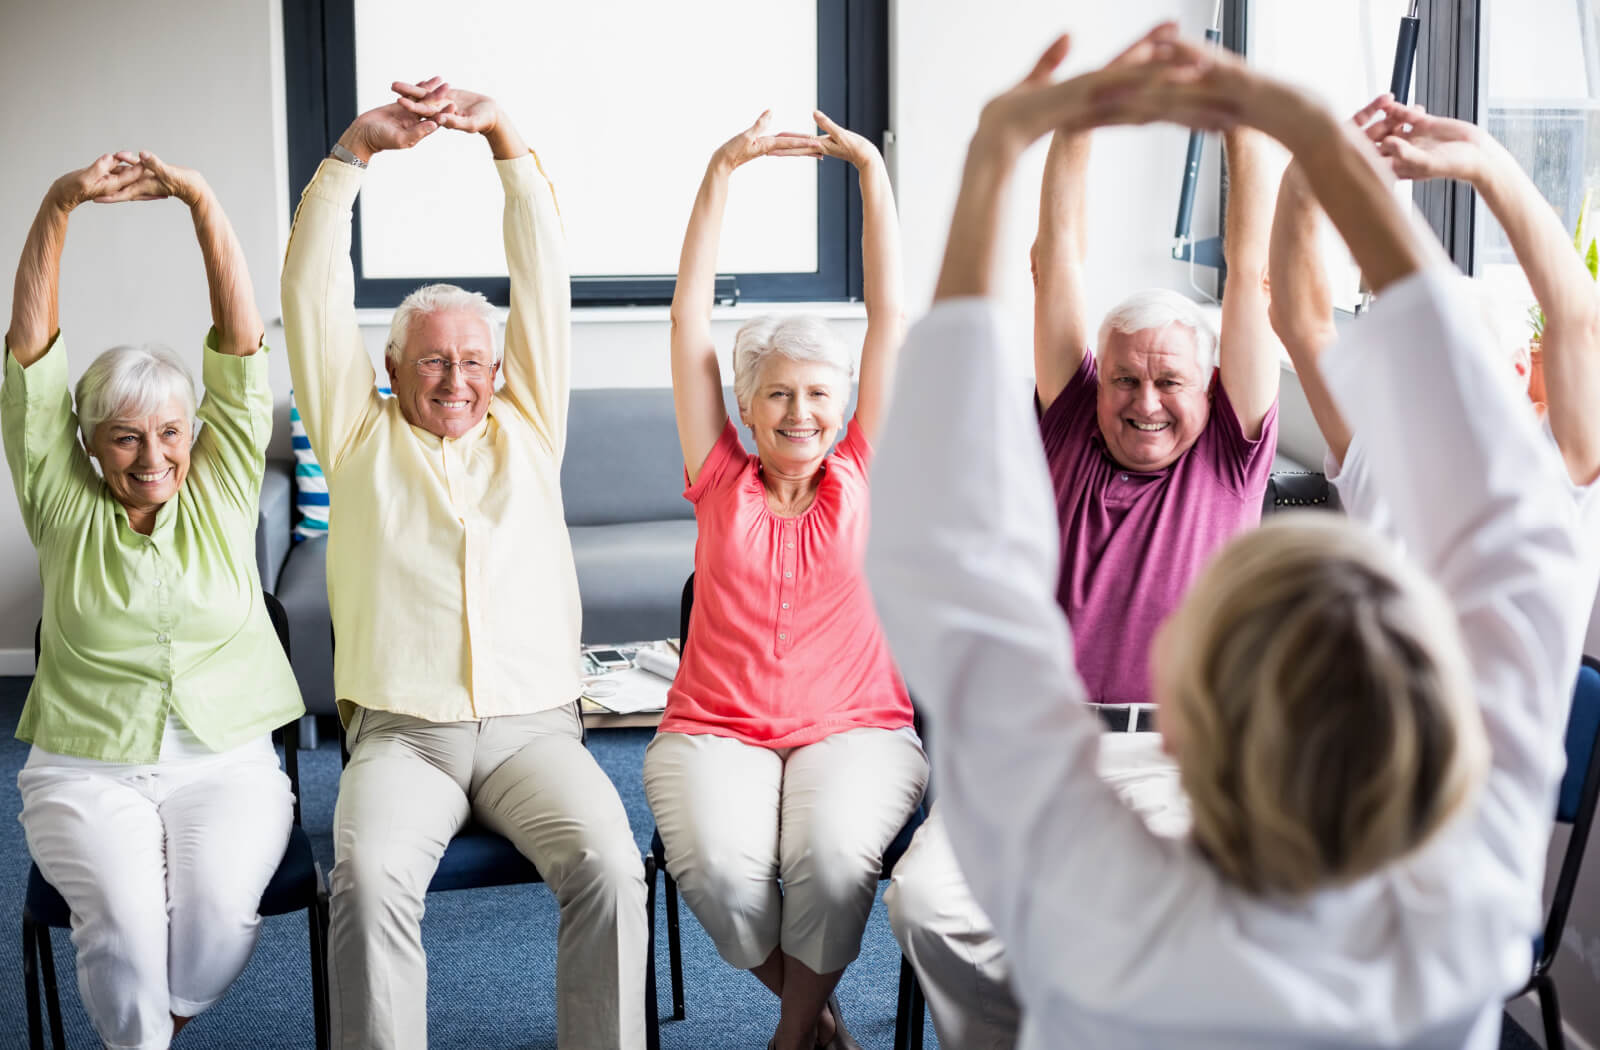 A group of seniors sitting and exercising together under the supervision of trained staff.